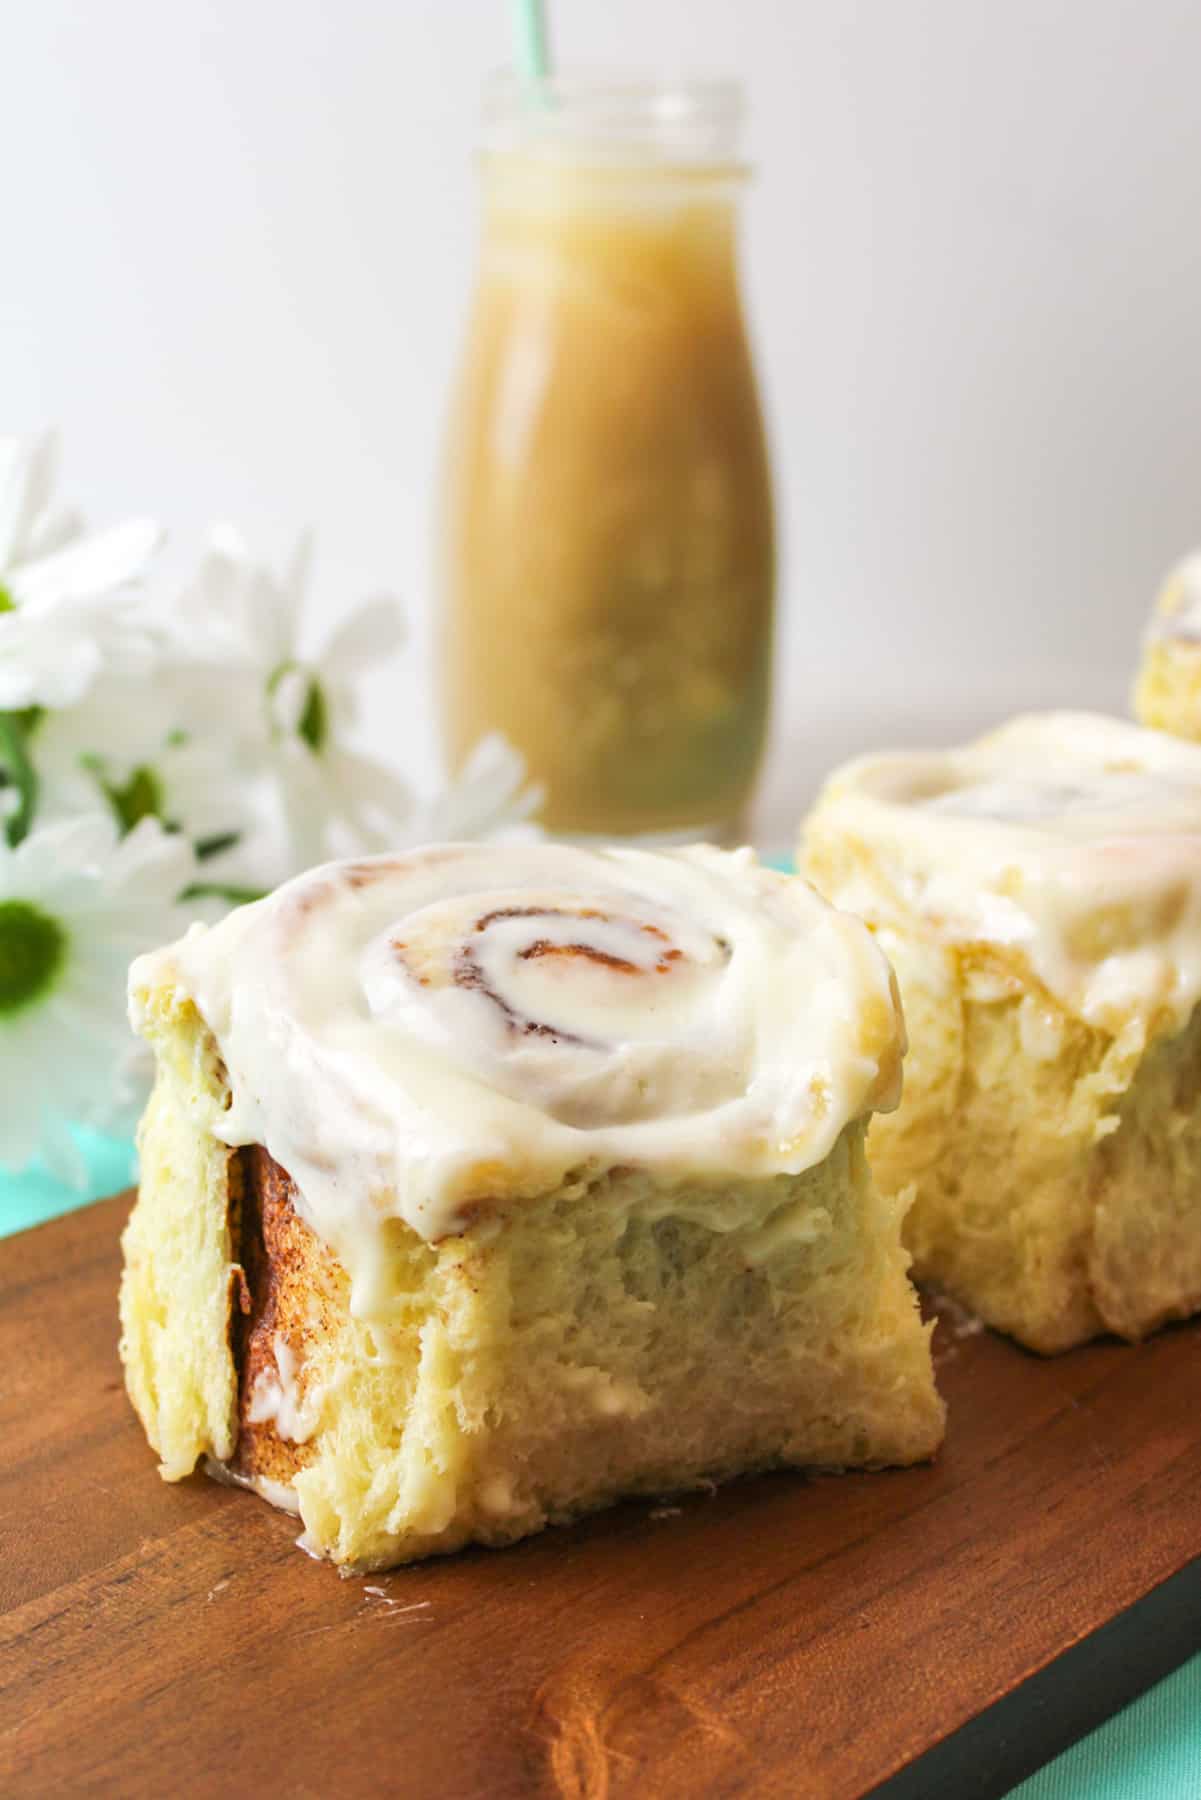 arranged cinnamon rolls on a wooden board with fresh flowers and bottle of coffee in background.